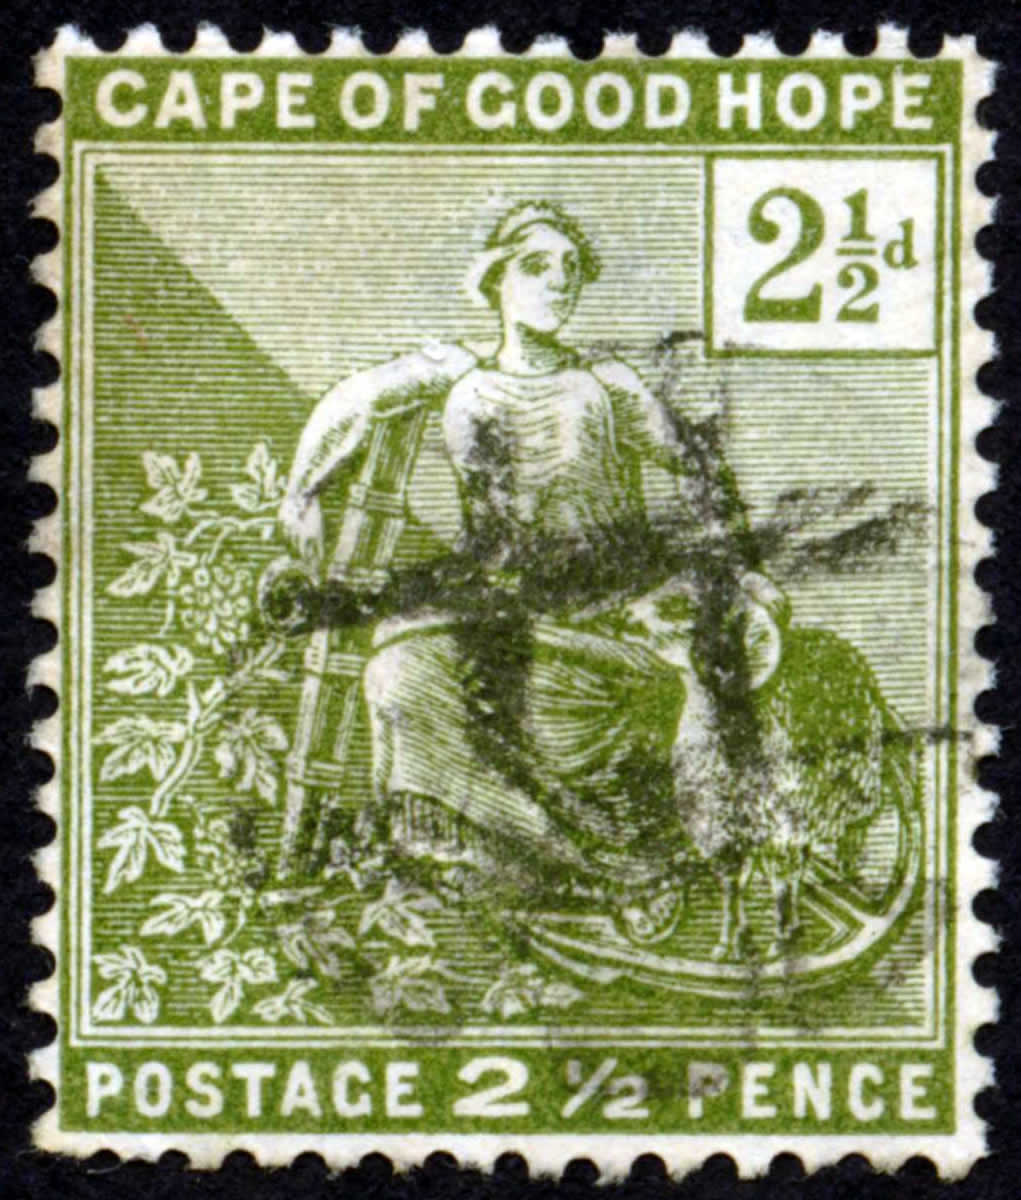 The Permanent 2 1/2 pence stamp of June 1892